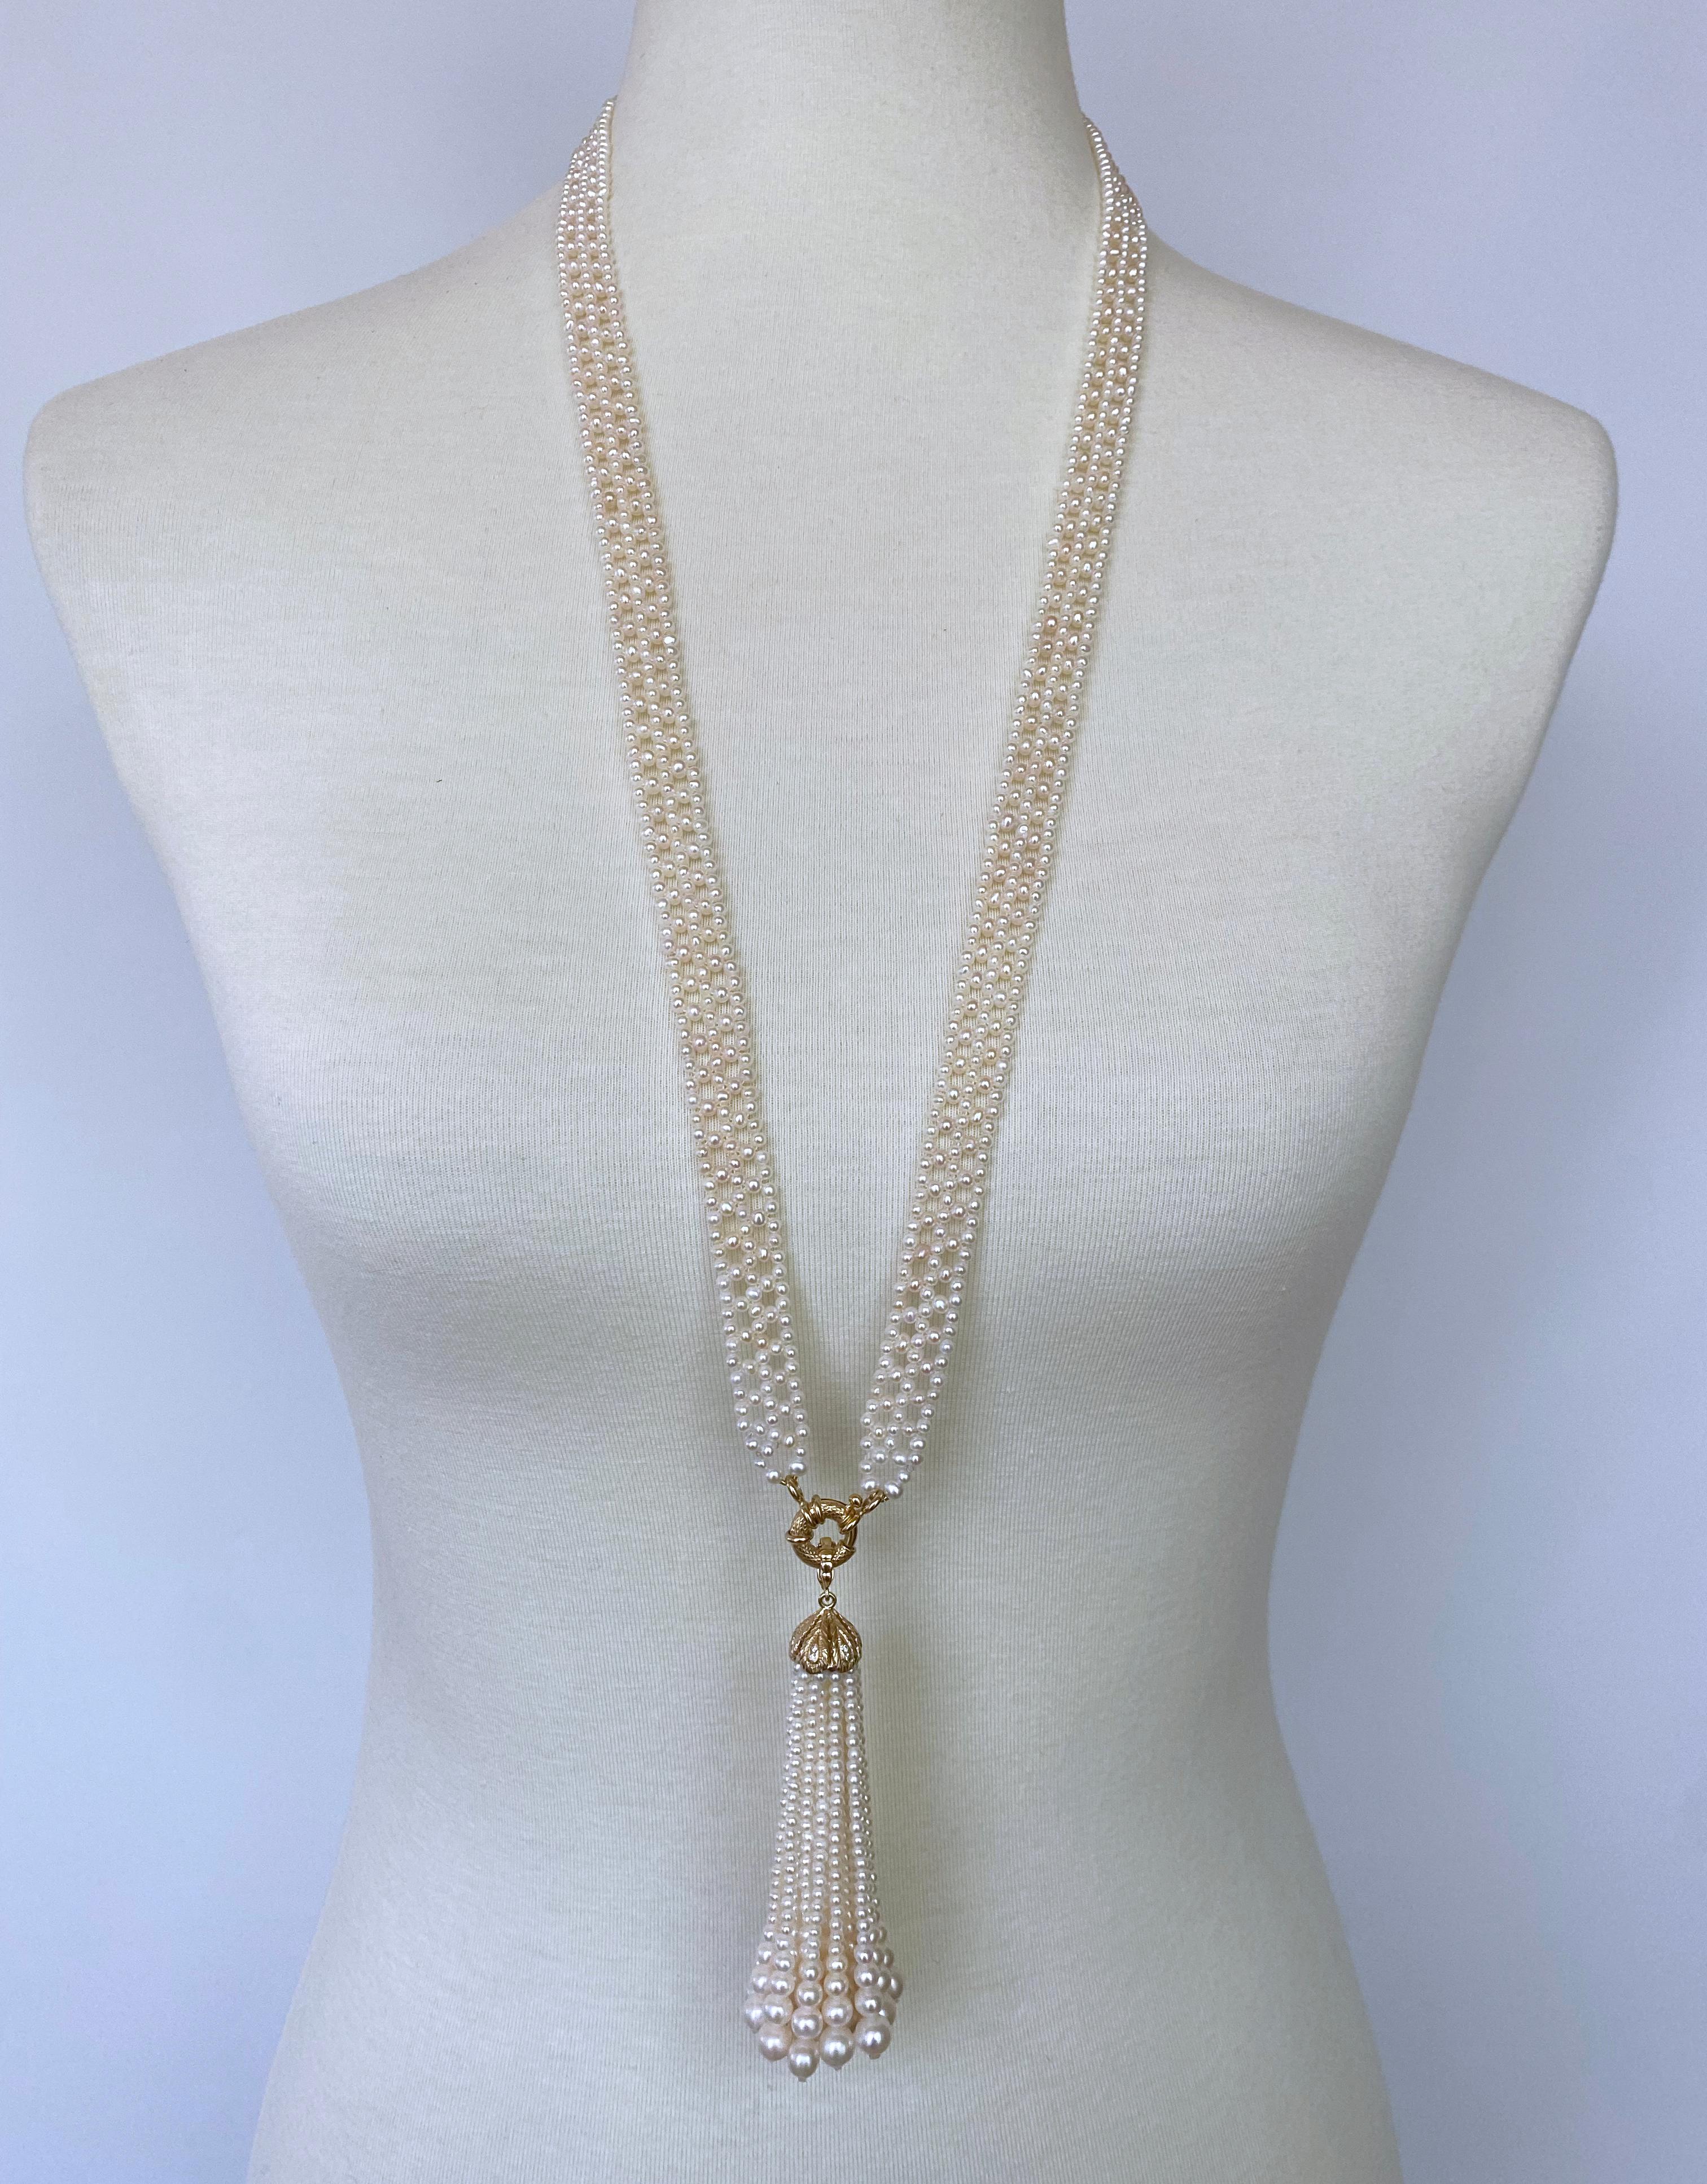 Beautiful piece made by Marina J. This Sautoir features all white Pearls which display a vivid iridescent sheen; intricately woven into a fine, lace like design. Measuring 33 inches long sans Tassel, this Sautoir meets at stunning a solid 14k Yellow